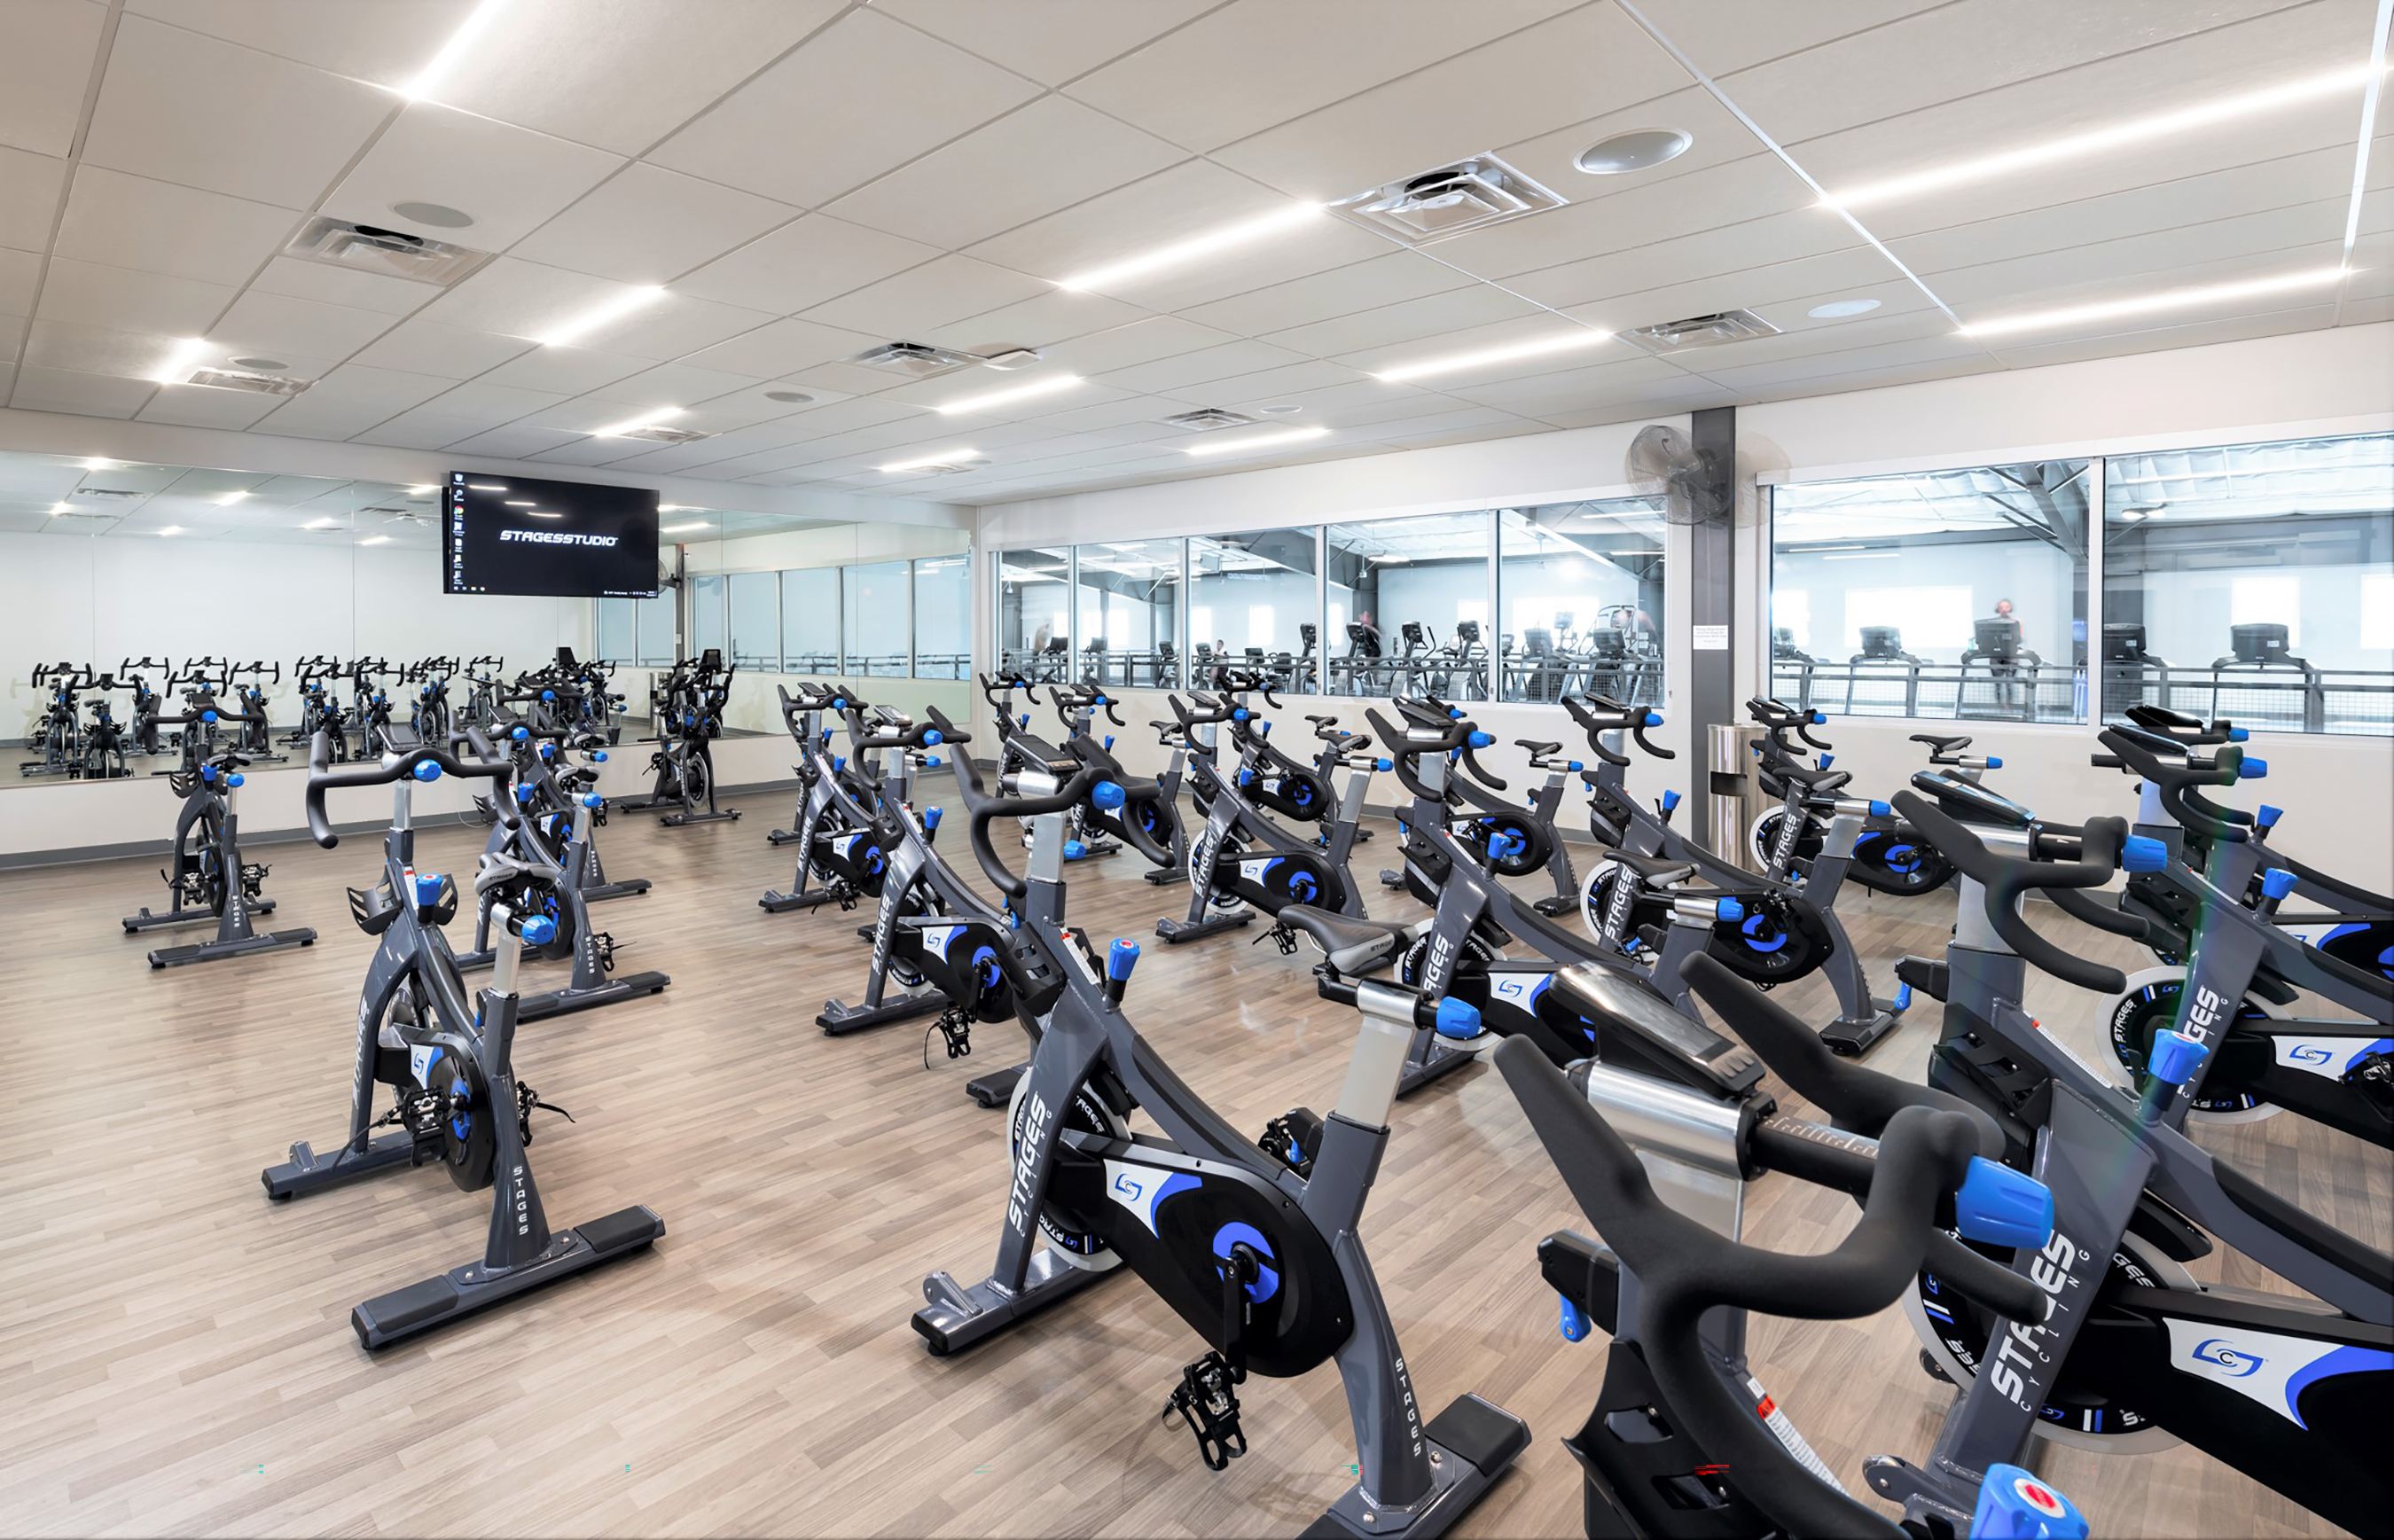 Spin, yoga, boxing and other group classes are scheduled daily, while U-Haul Team Members and their families also have on-site access to a full-service health clinic and dental office.